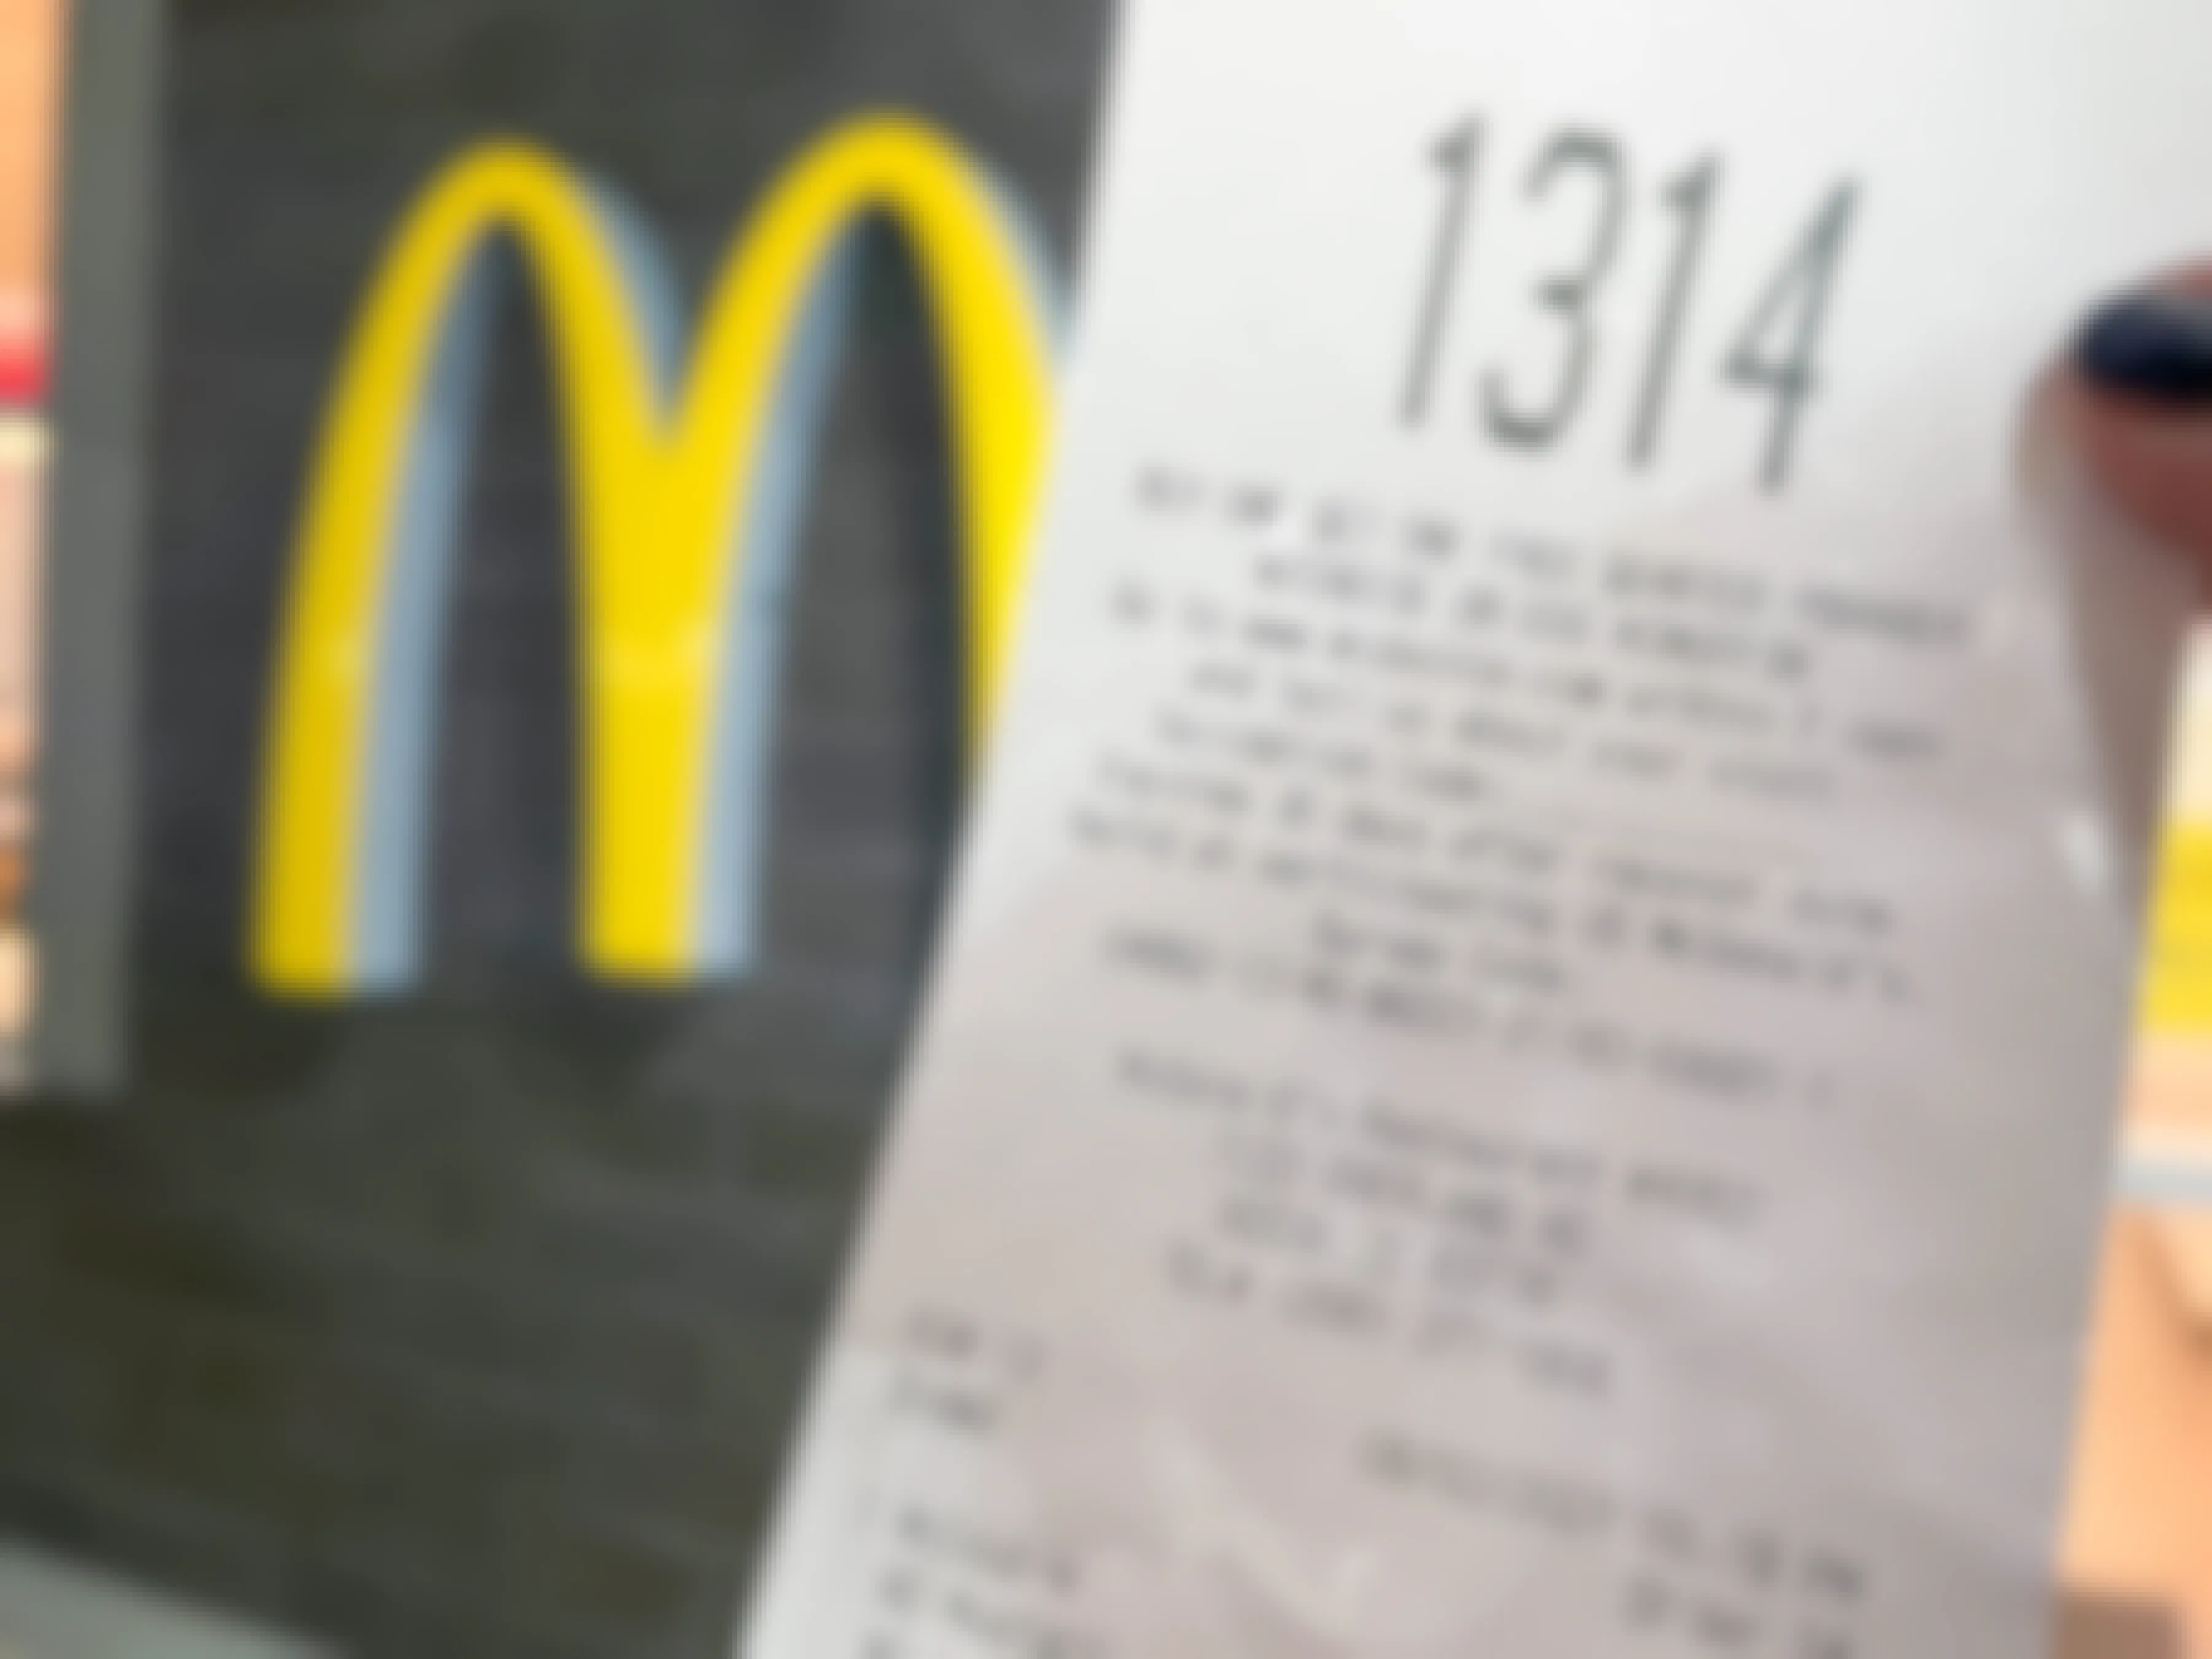 A McDonald's receipt with a survey offer being held up in front of the golden arches logo inside a McDonald's restaurant.